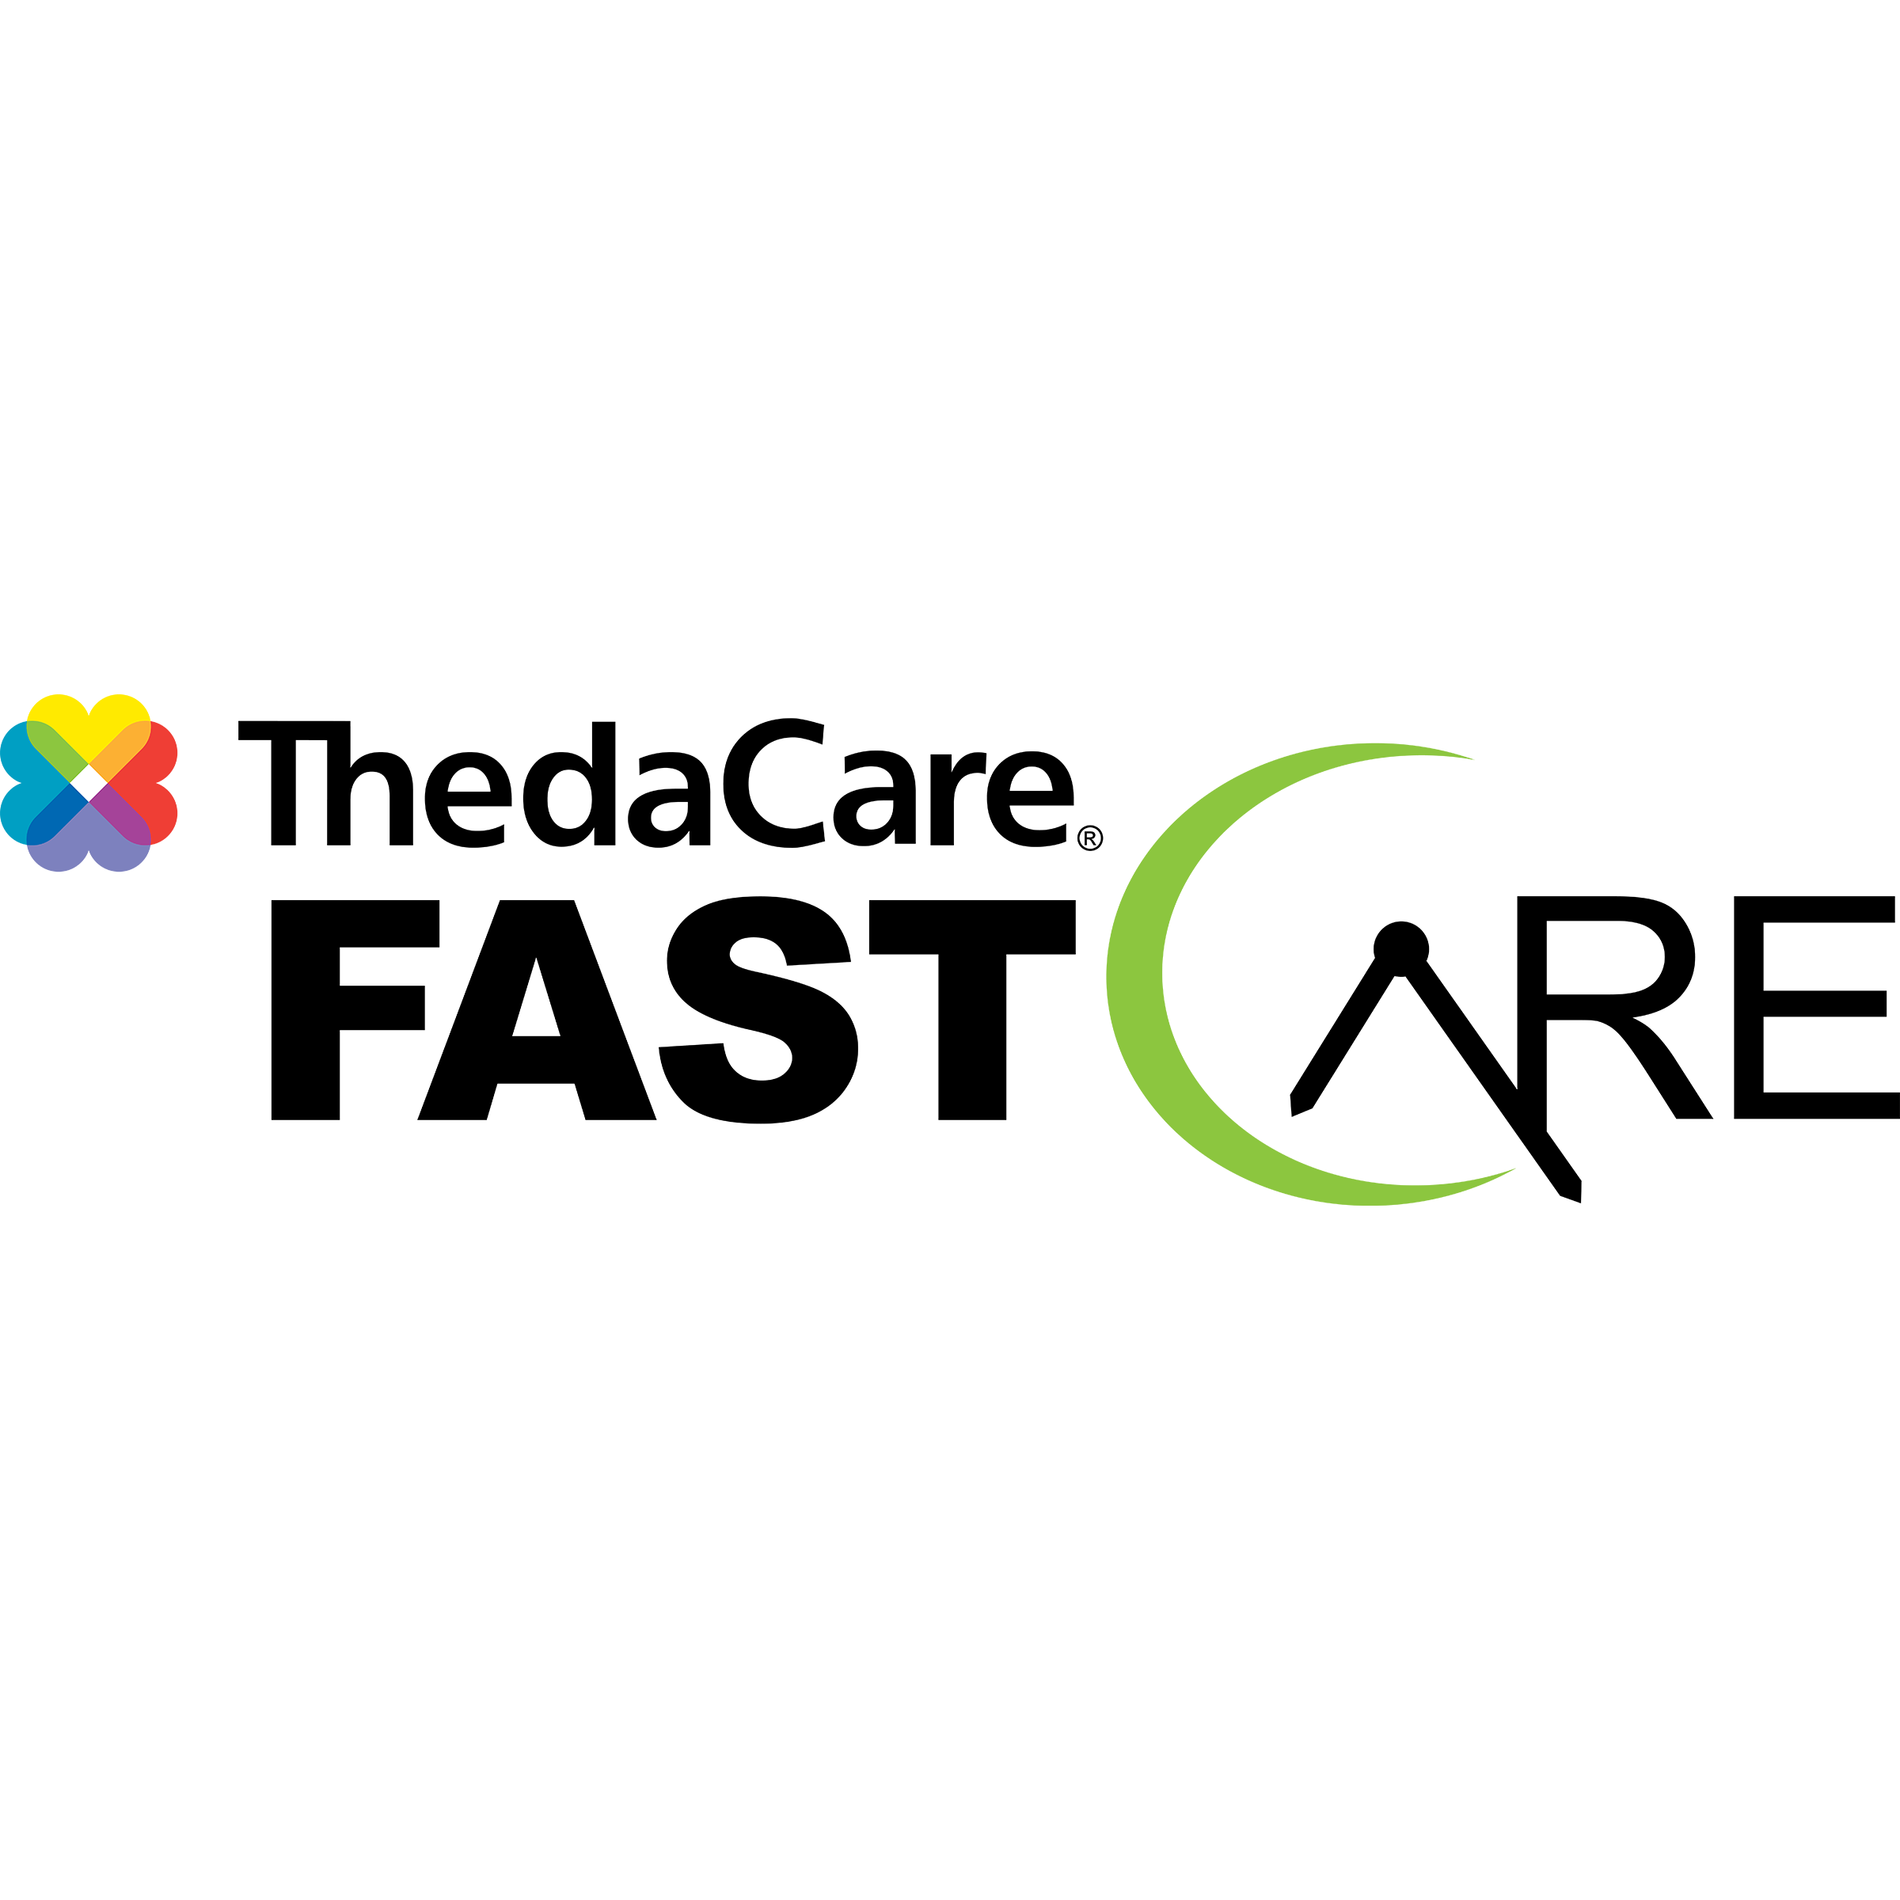 ThedaCare FastCare-Grand Chute - Appleton, WI 54913 - (866)455-8111 | ShowMeLocal.com